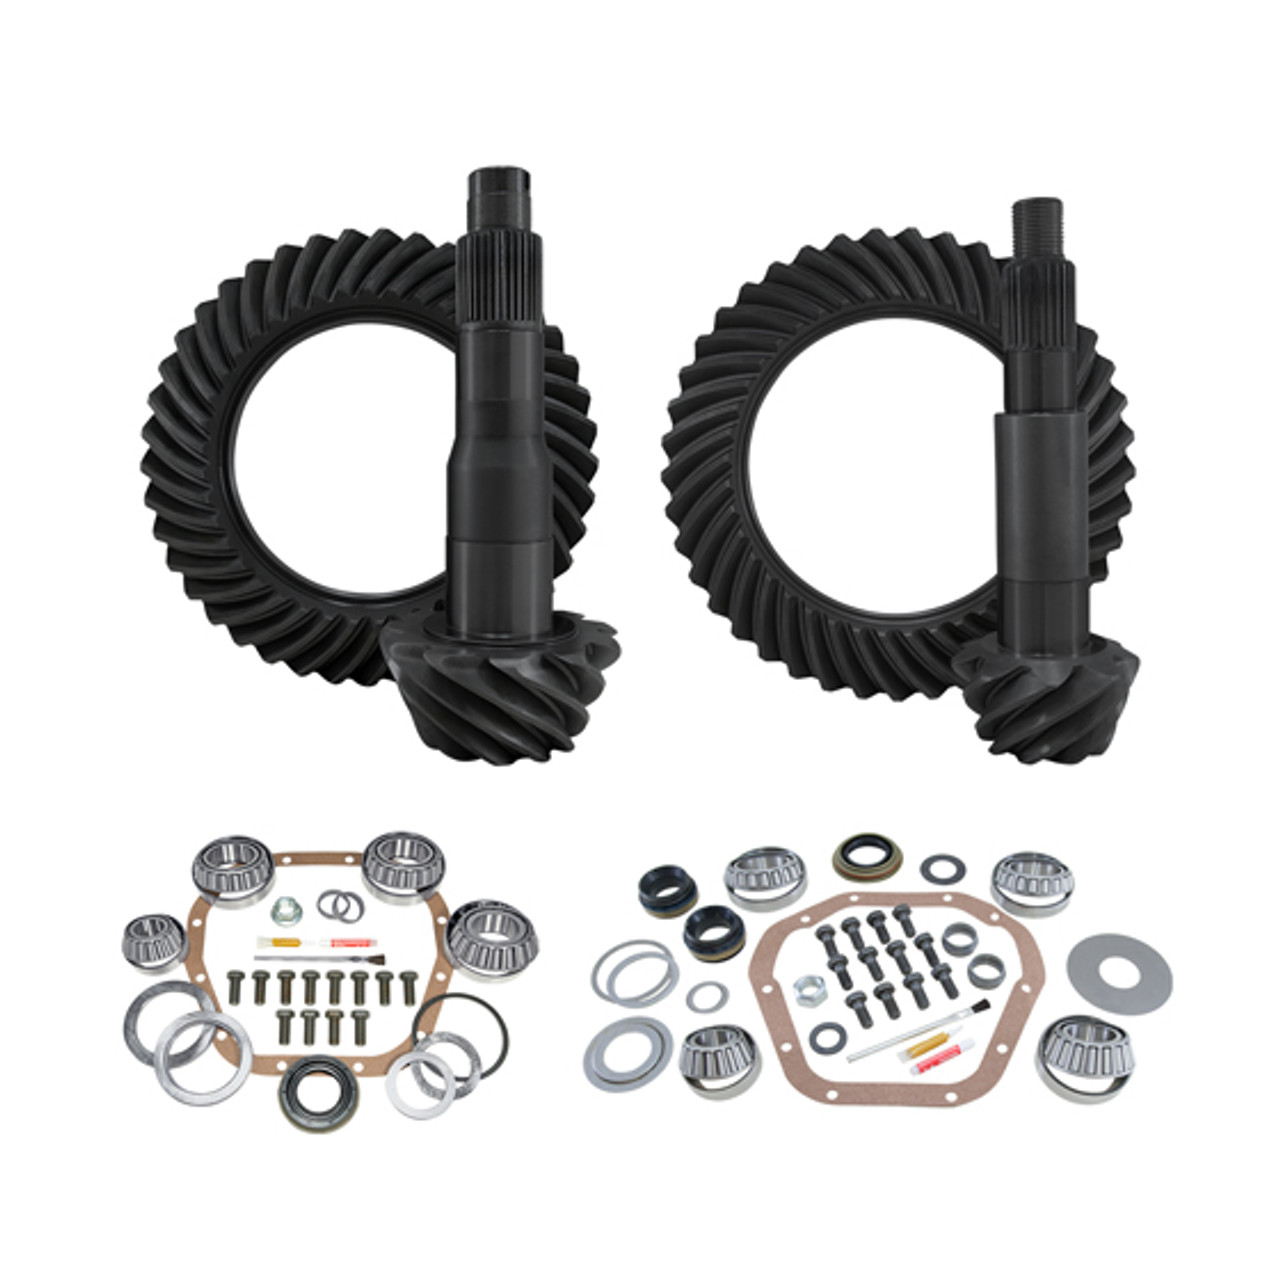 Yukon Complete Gear and Kit Package for F250 and F350 Dana 60, with 3:73 Gear Ratio